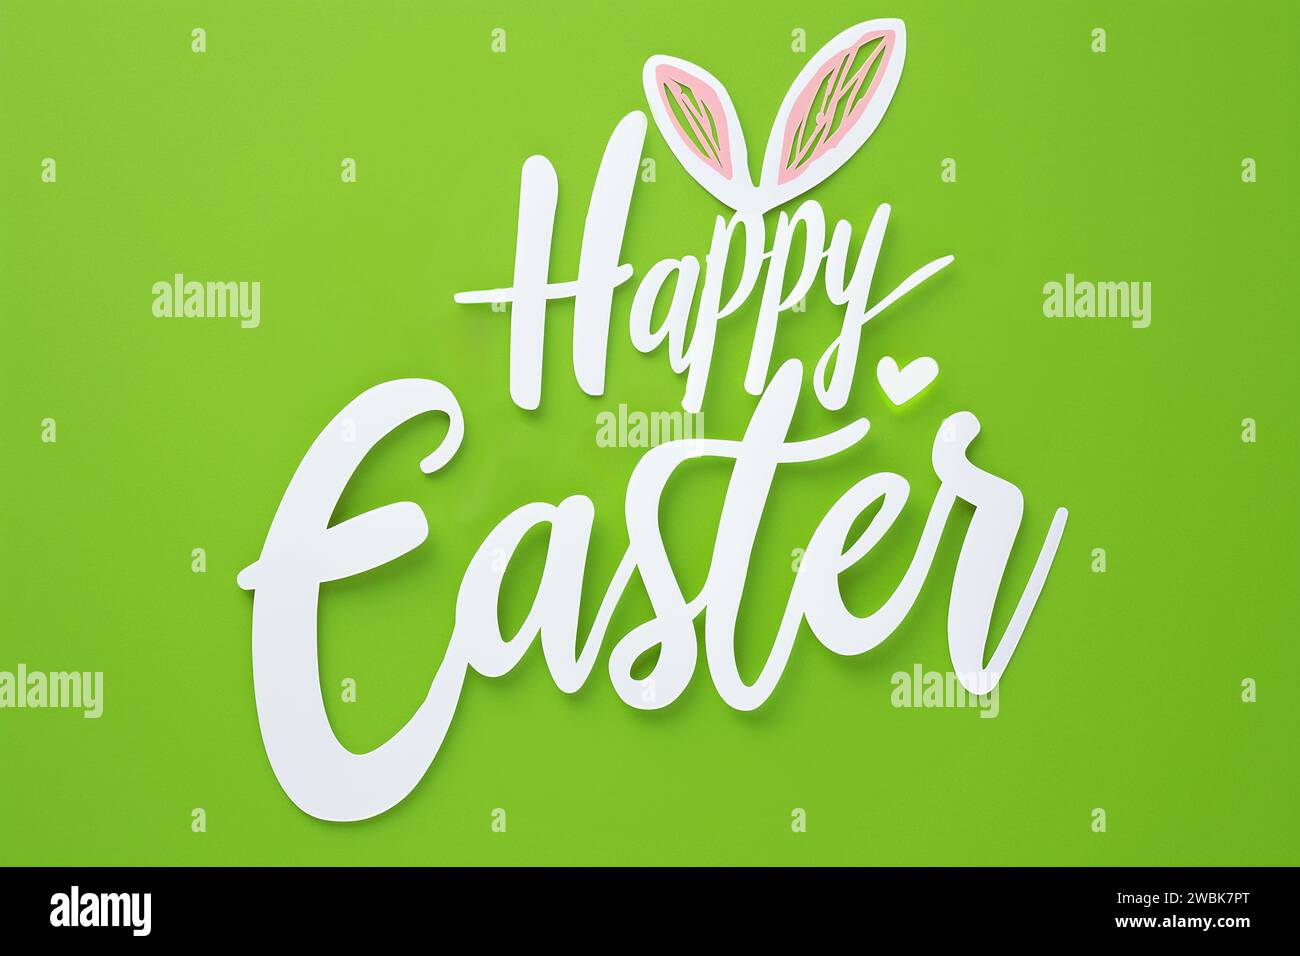 Fresh Spring Greeting: Happy Easter with Bunny Ears on Lively Green Background Stock Photo